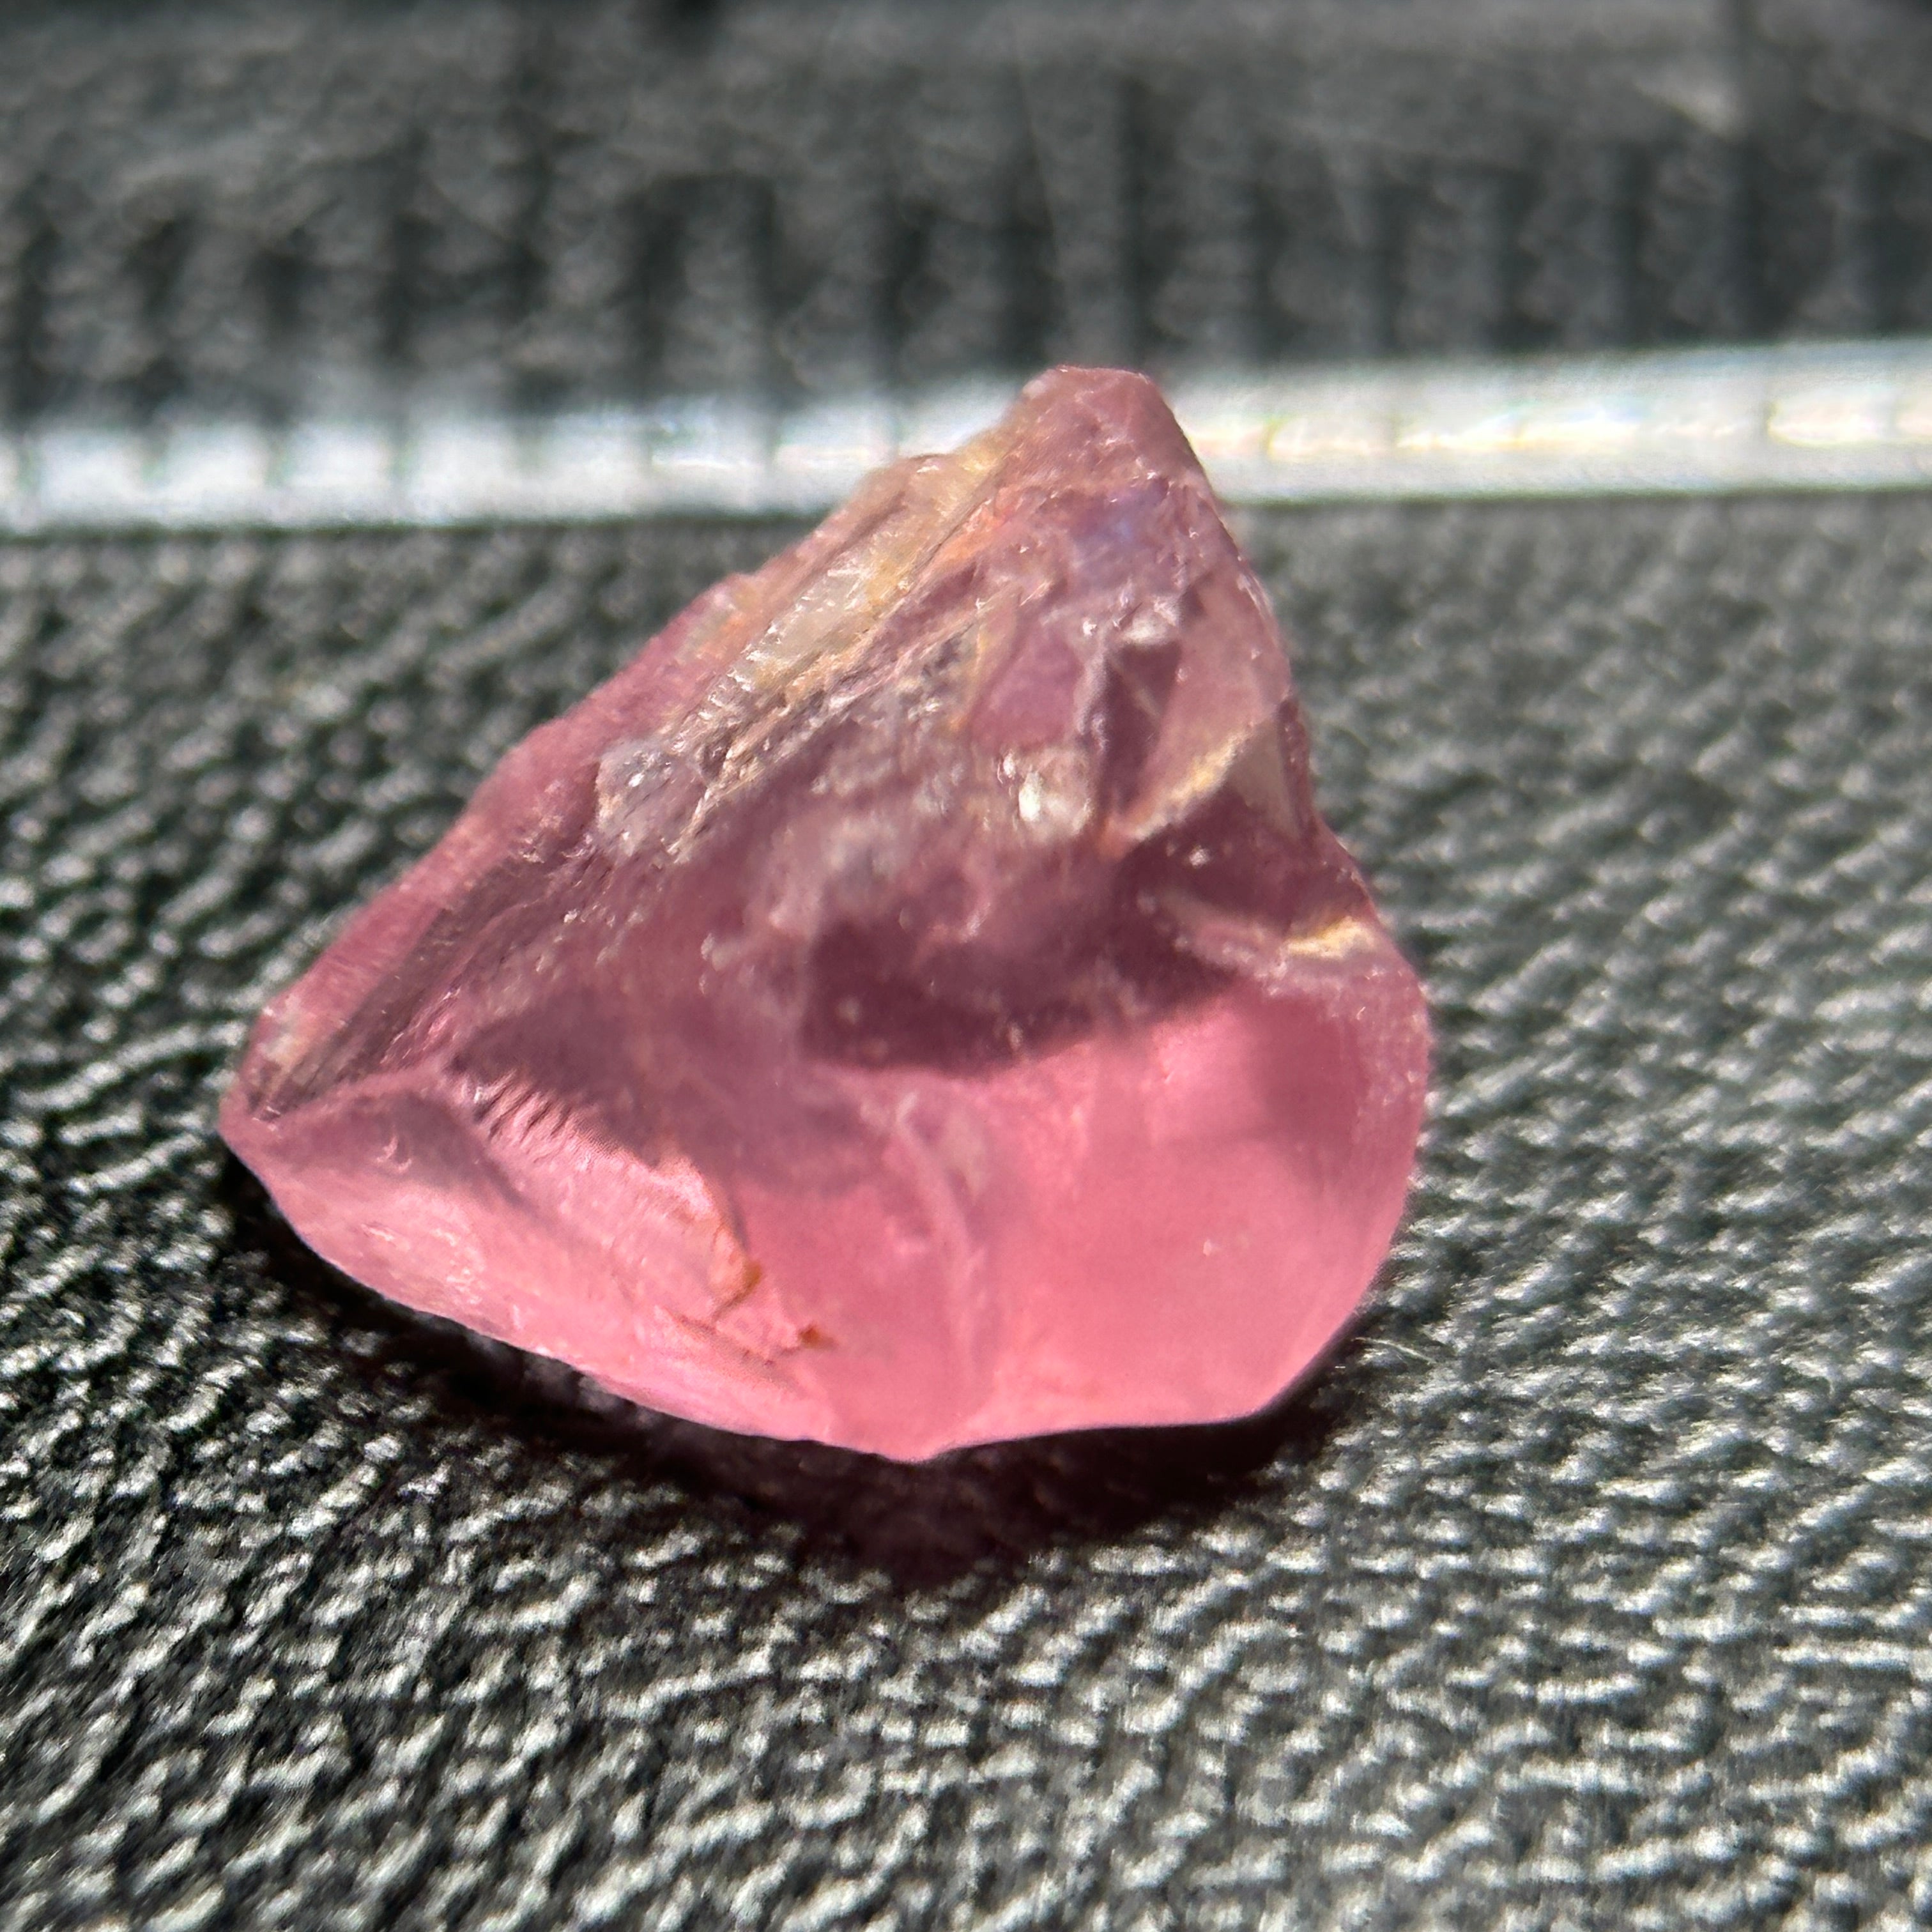 3.14ct Spinel, Tanzania, Untreated Unheated, slight inclusion on the side coming 1/3rd in